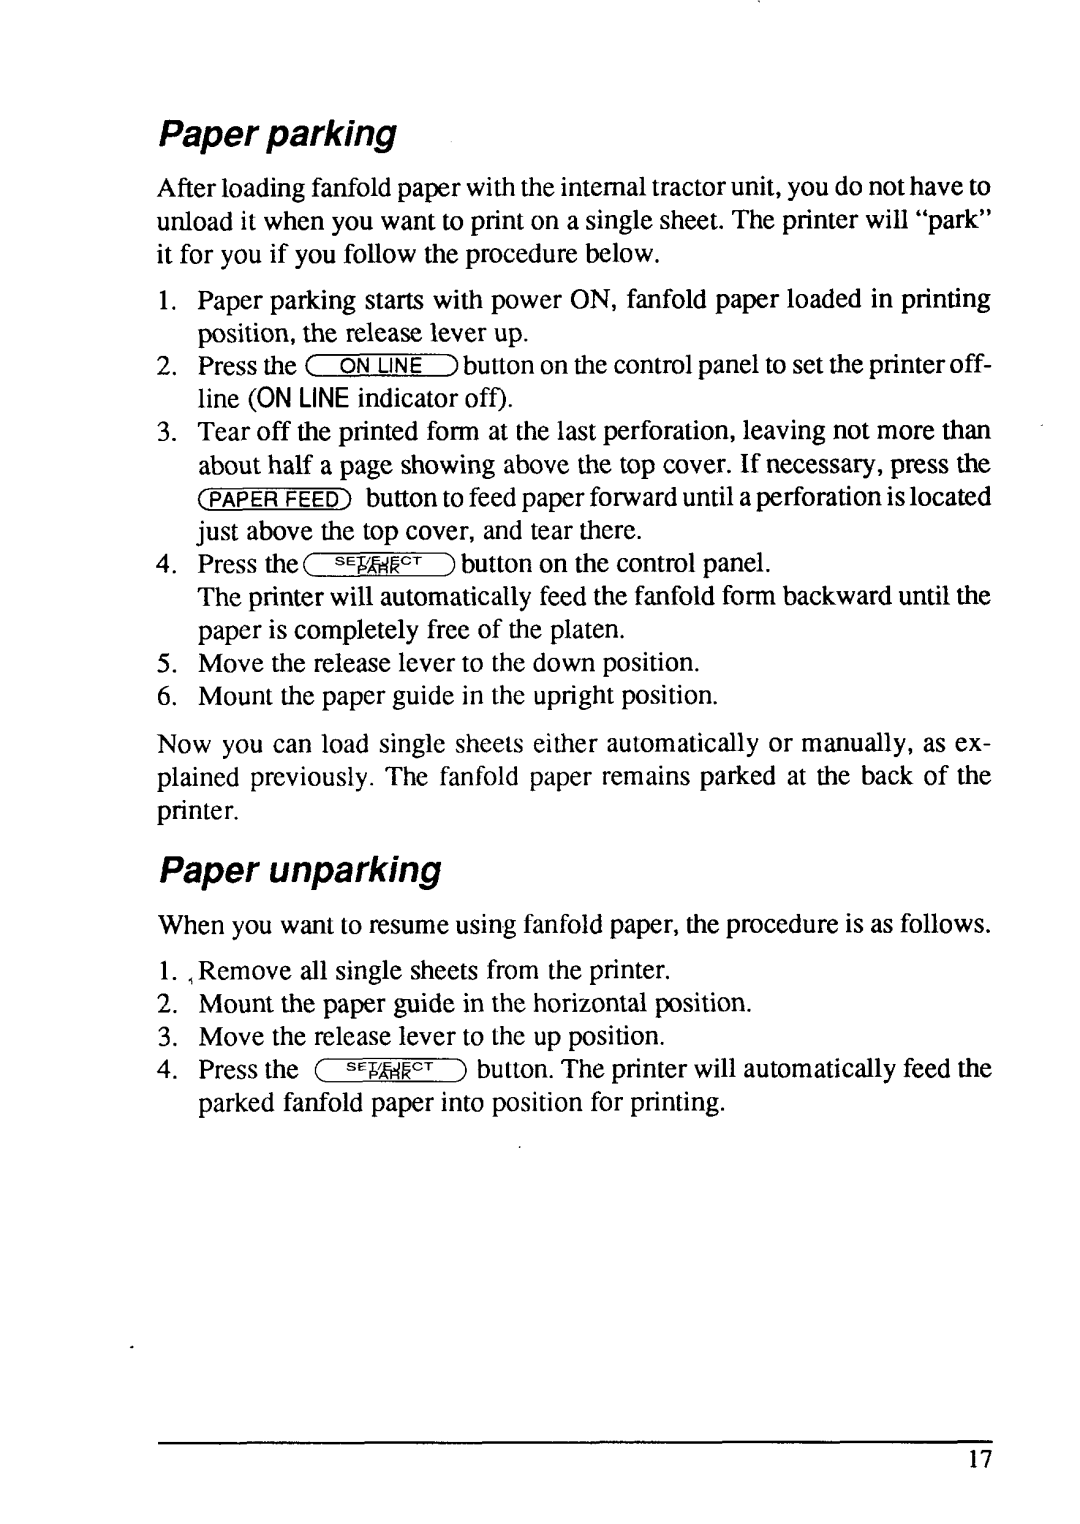 Star Micronics LC24-15 user manual Paper parking, Paper unparking 